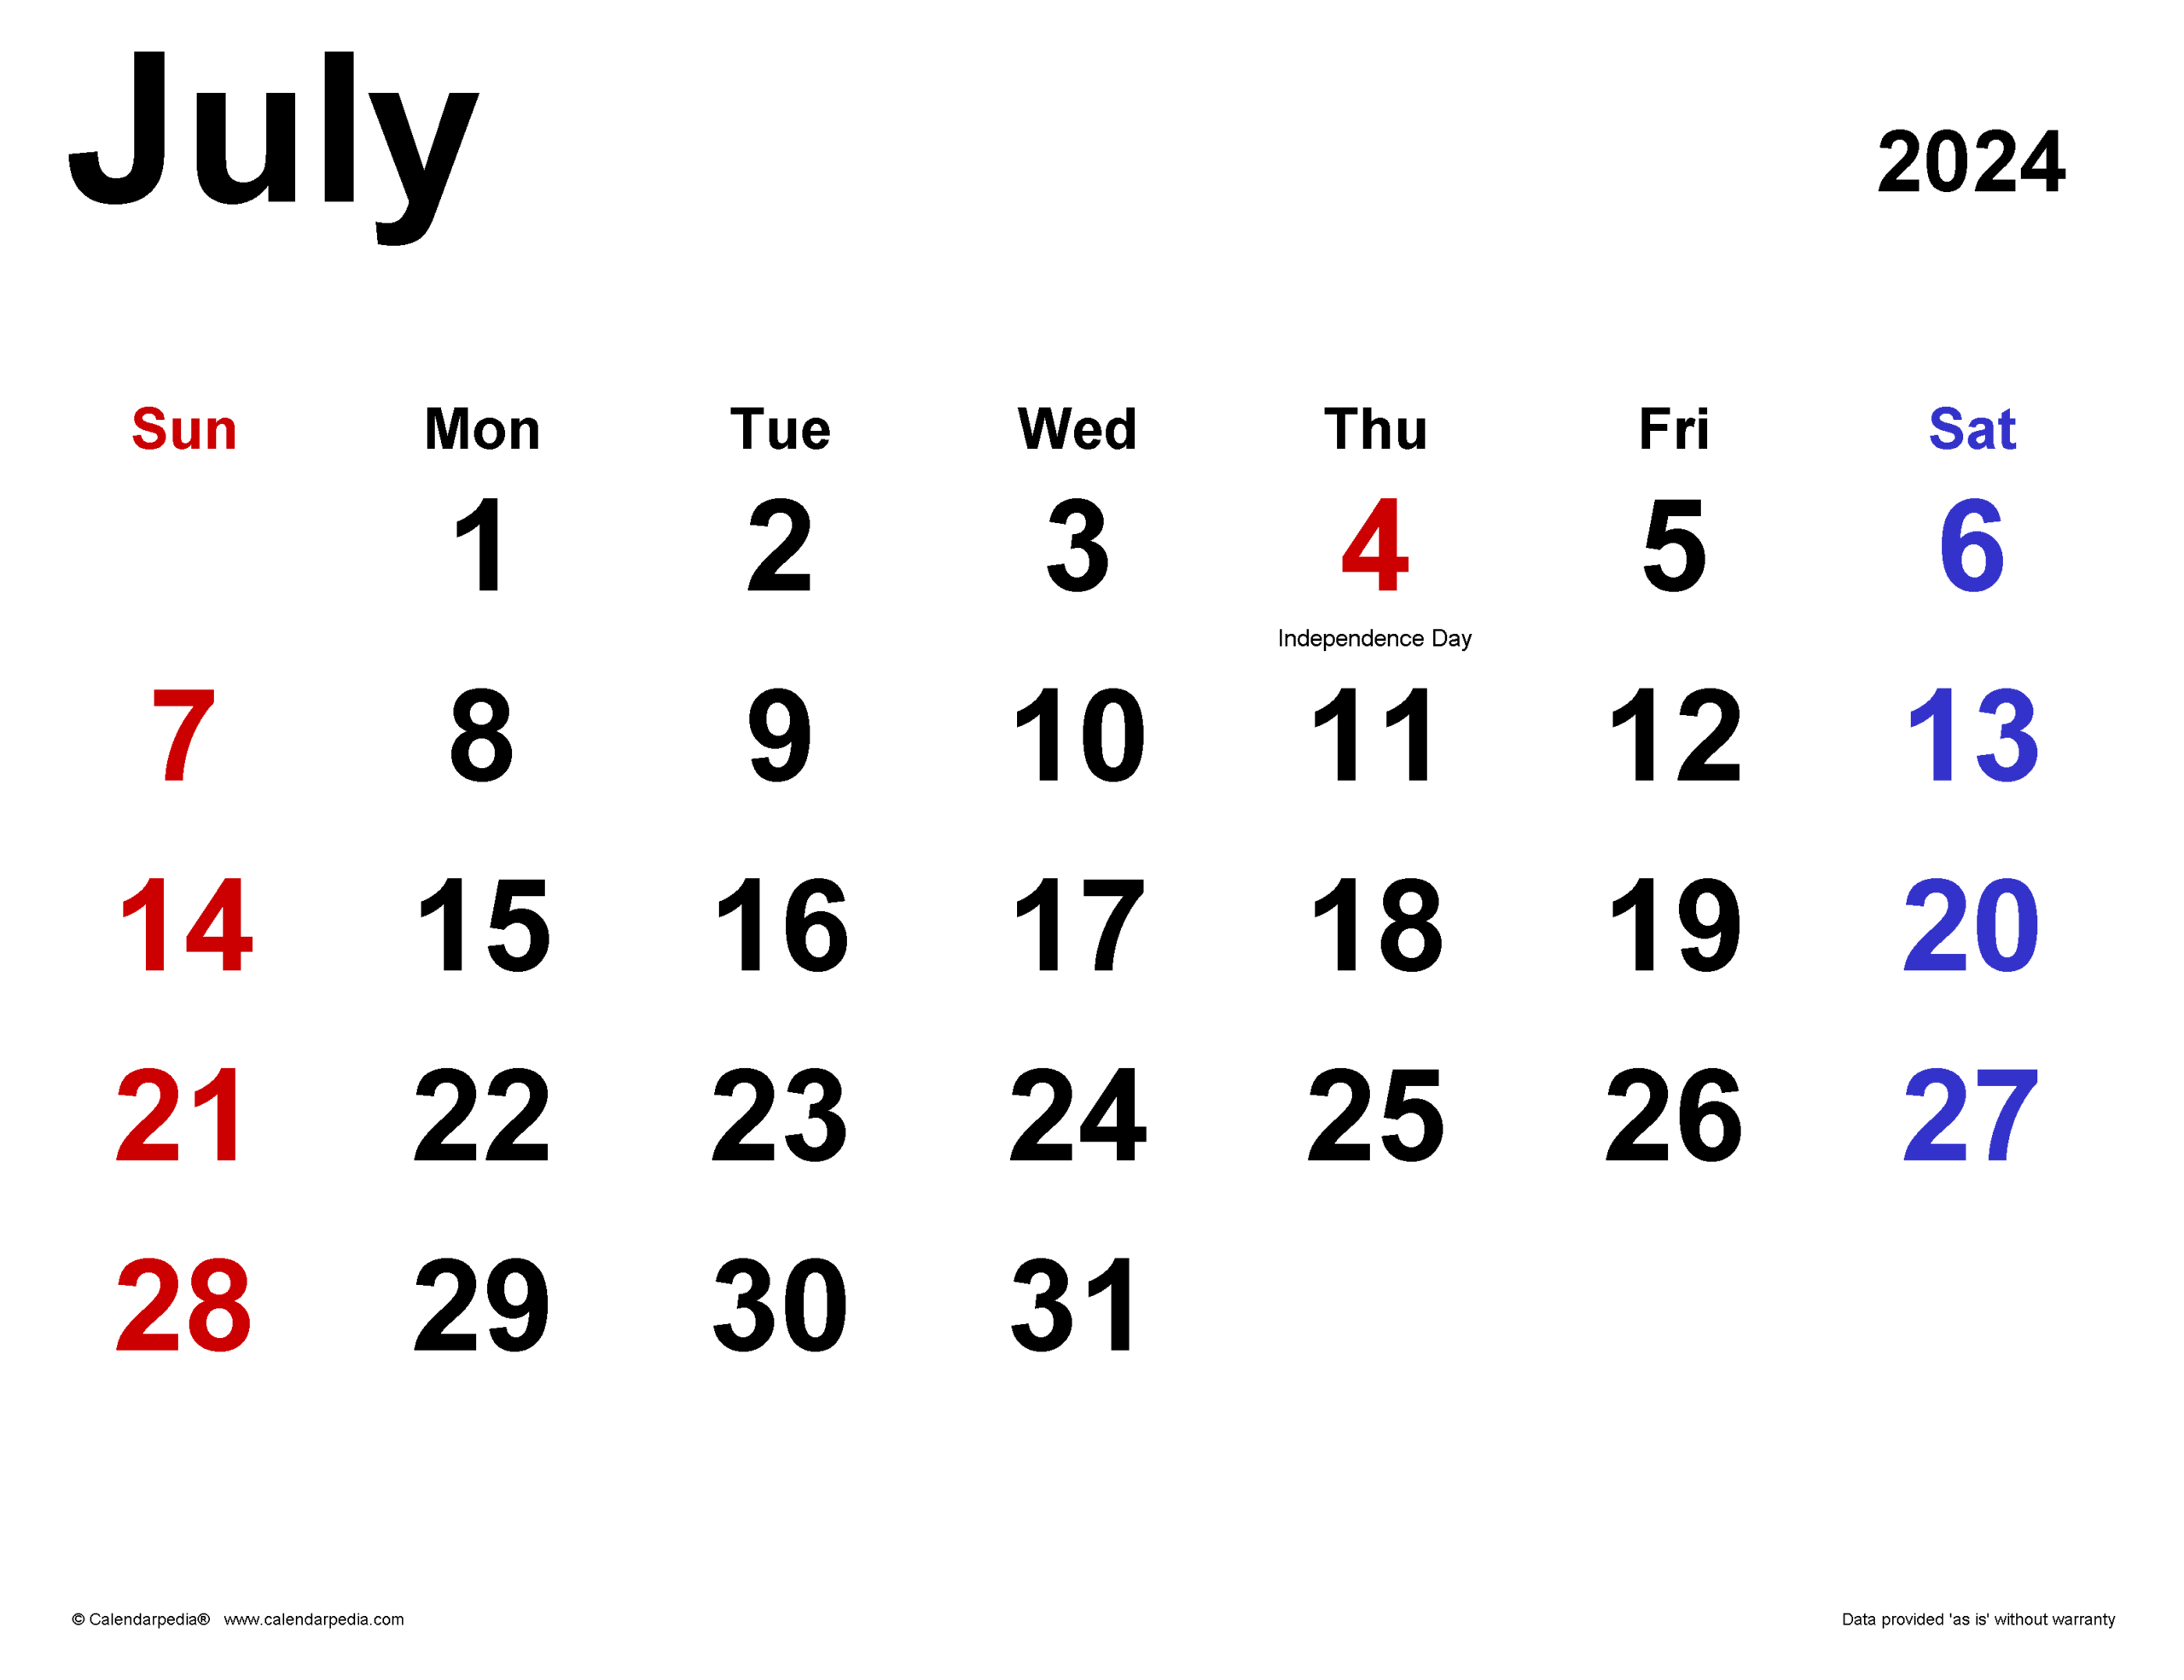 July 2024 Calendar | Templates For Word, Excel And Pdf with regard to July Calendar 2024 Word